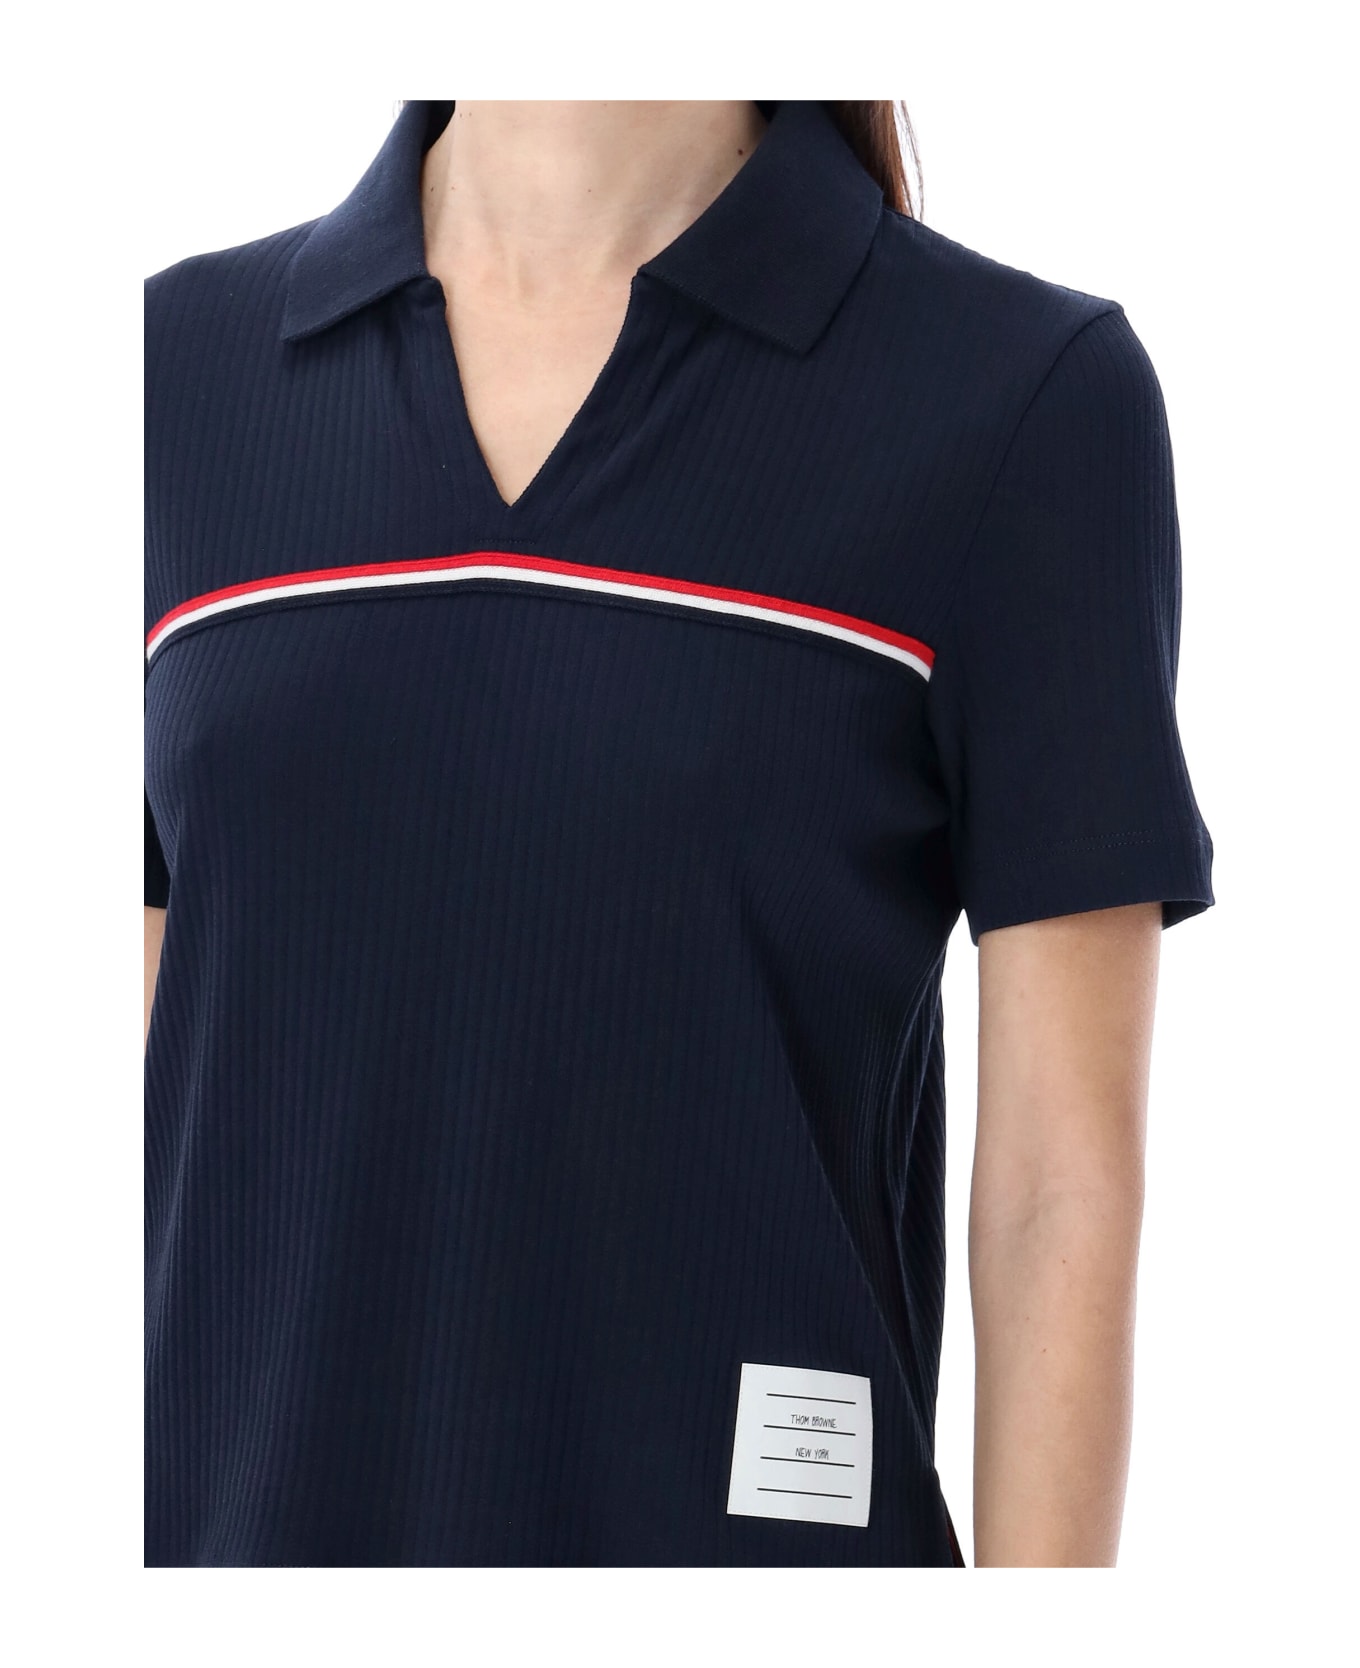 Thom Browne S/s Polo With Web Stripes - NAVY